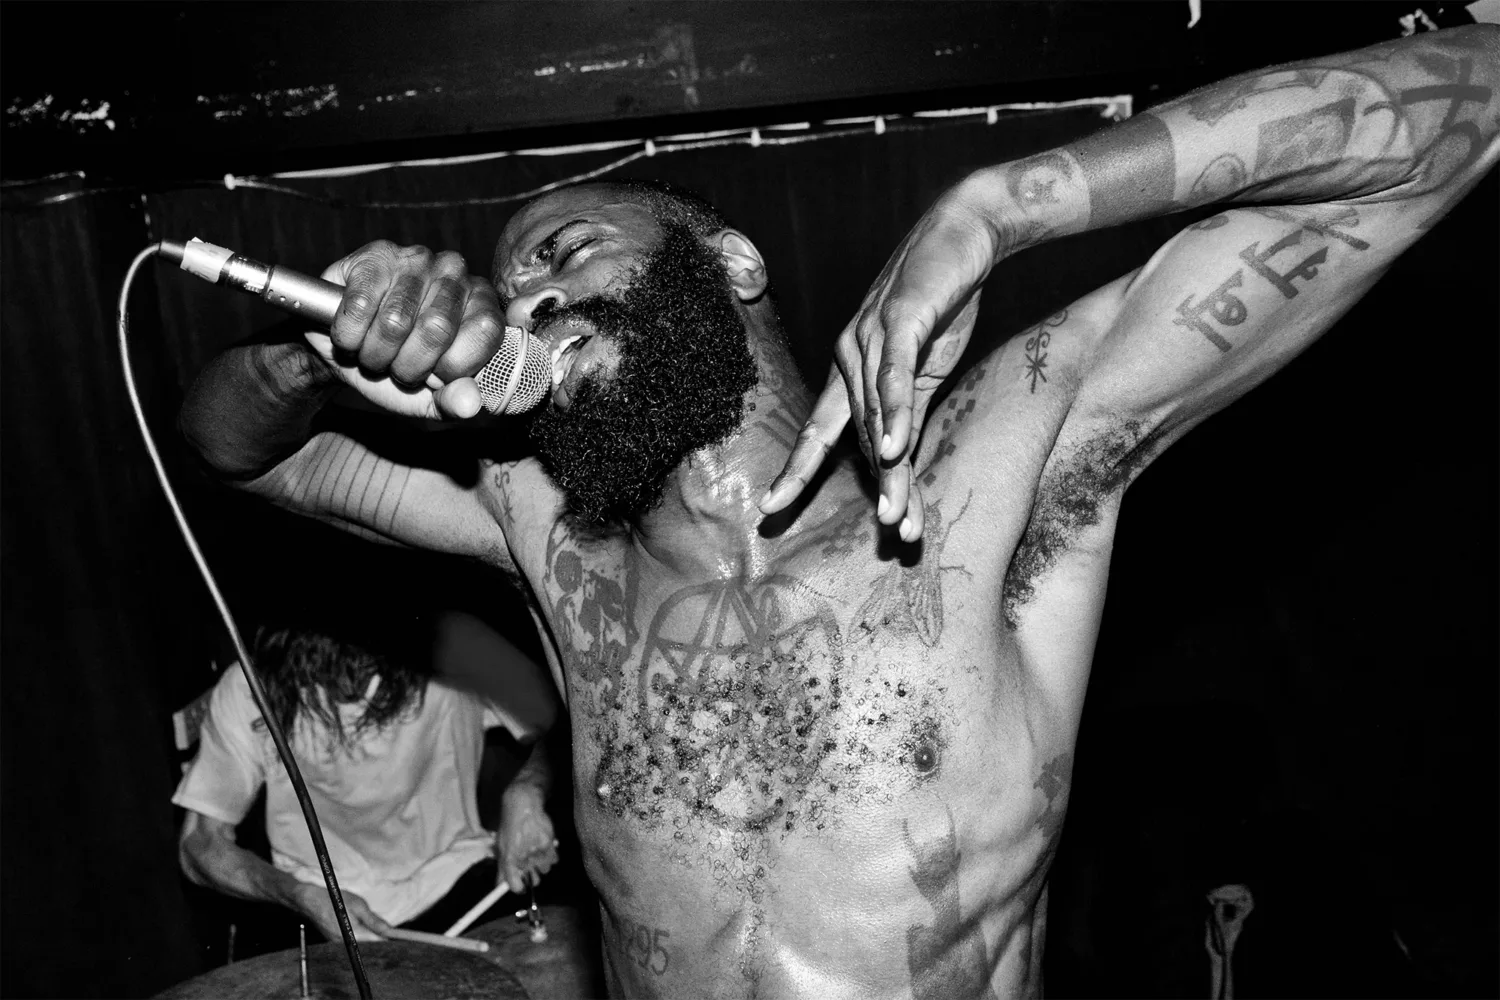 “Death Grips is over” - band announce split